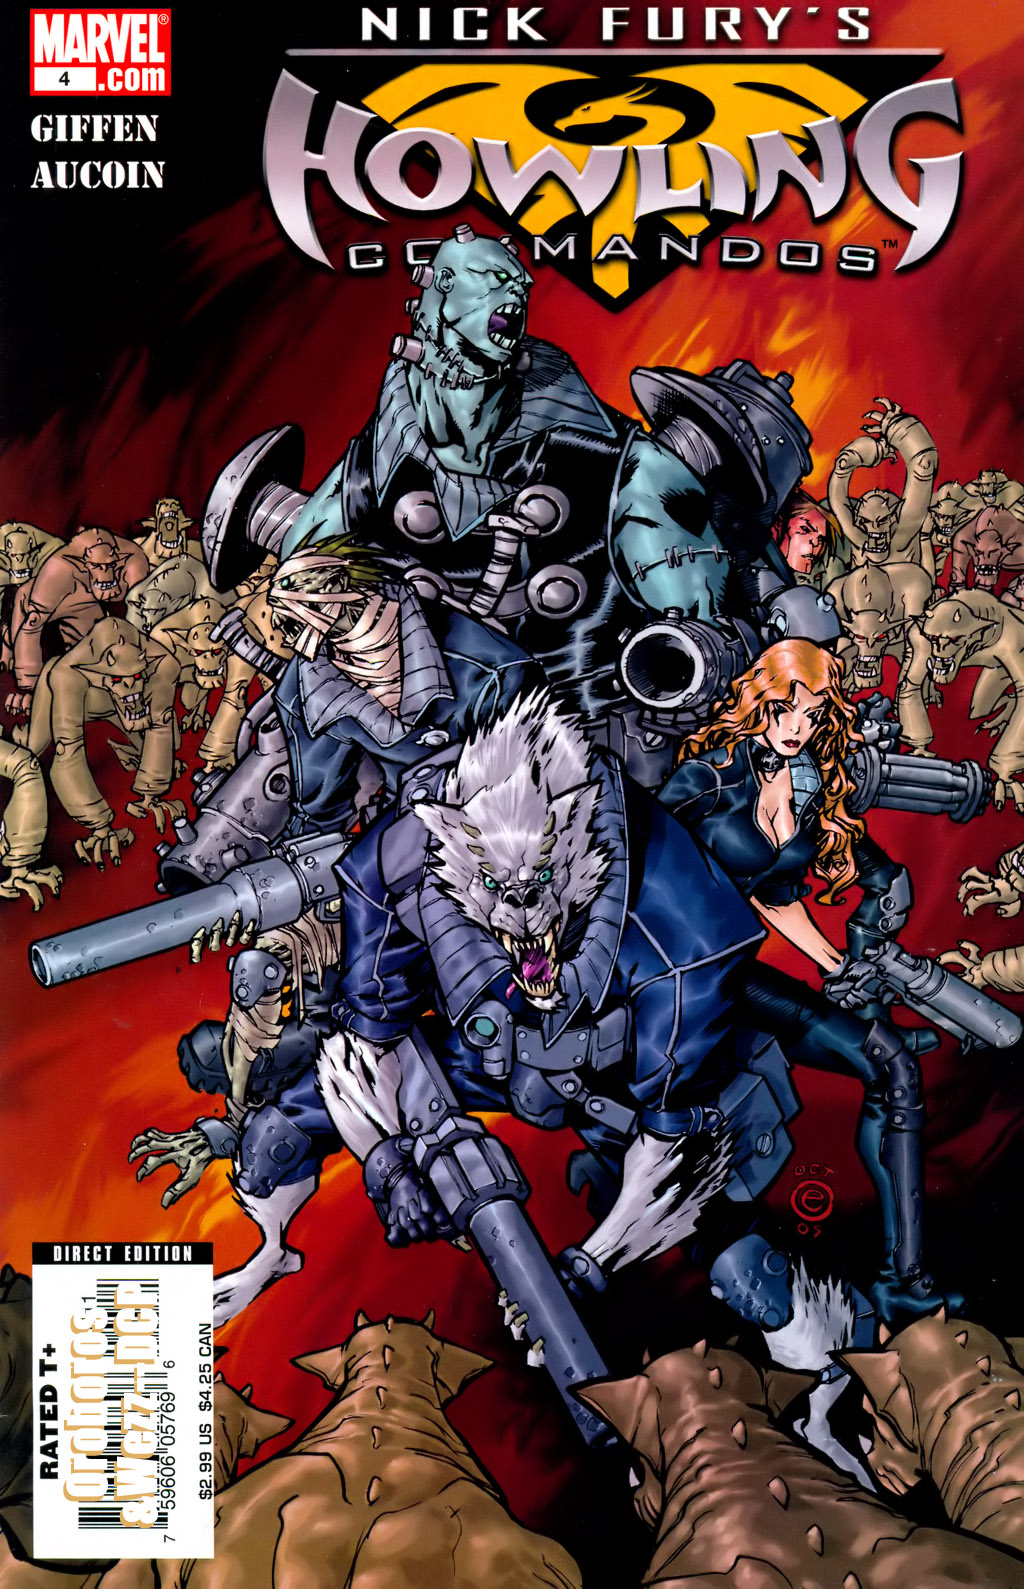 Read online Nick Fury's Howling Commandos comic -  Issue #4 - 1